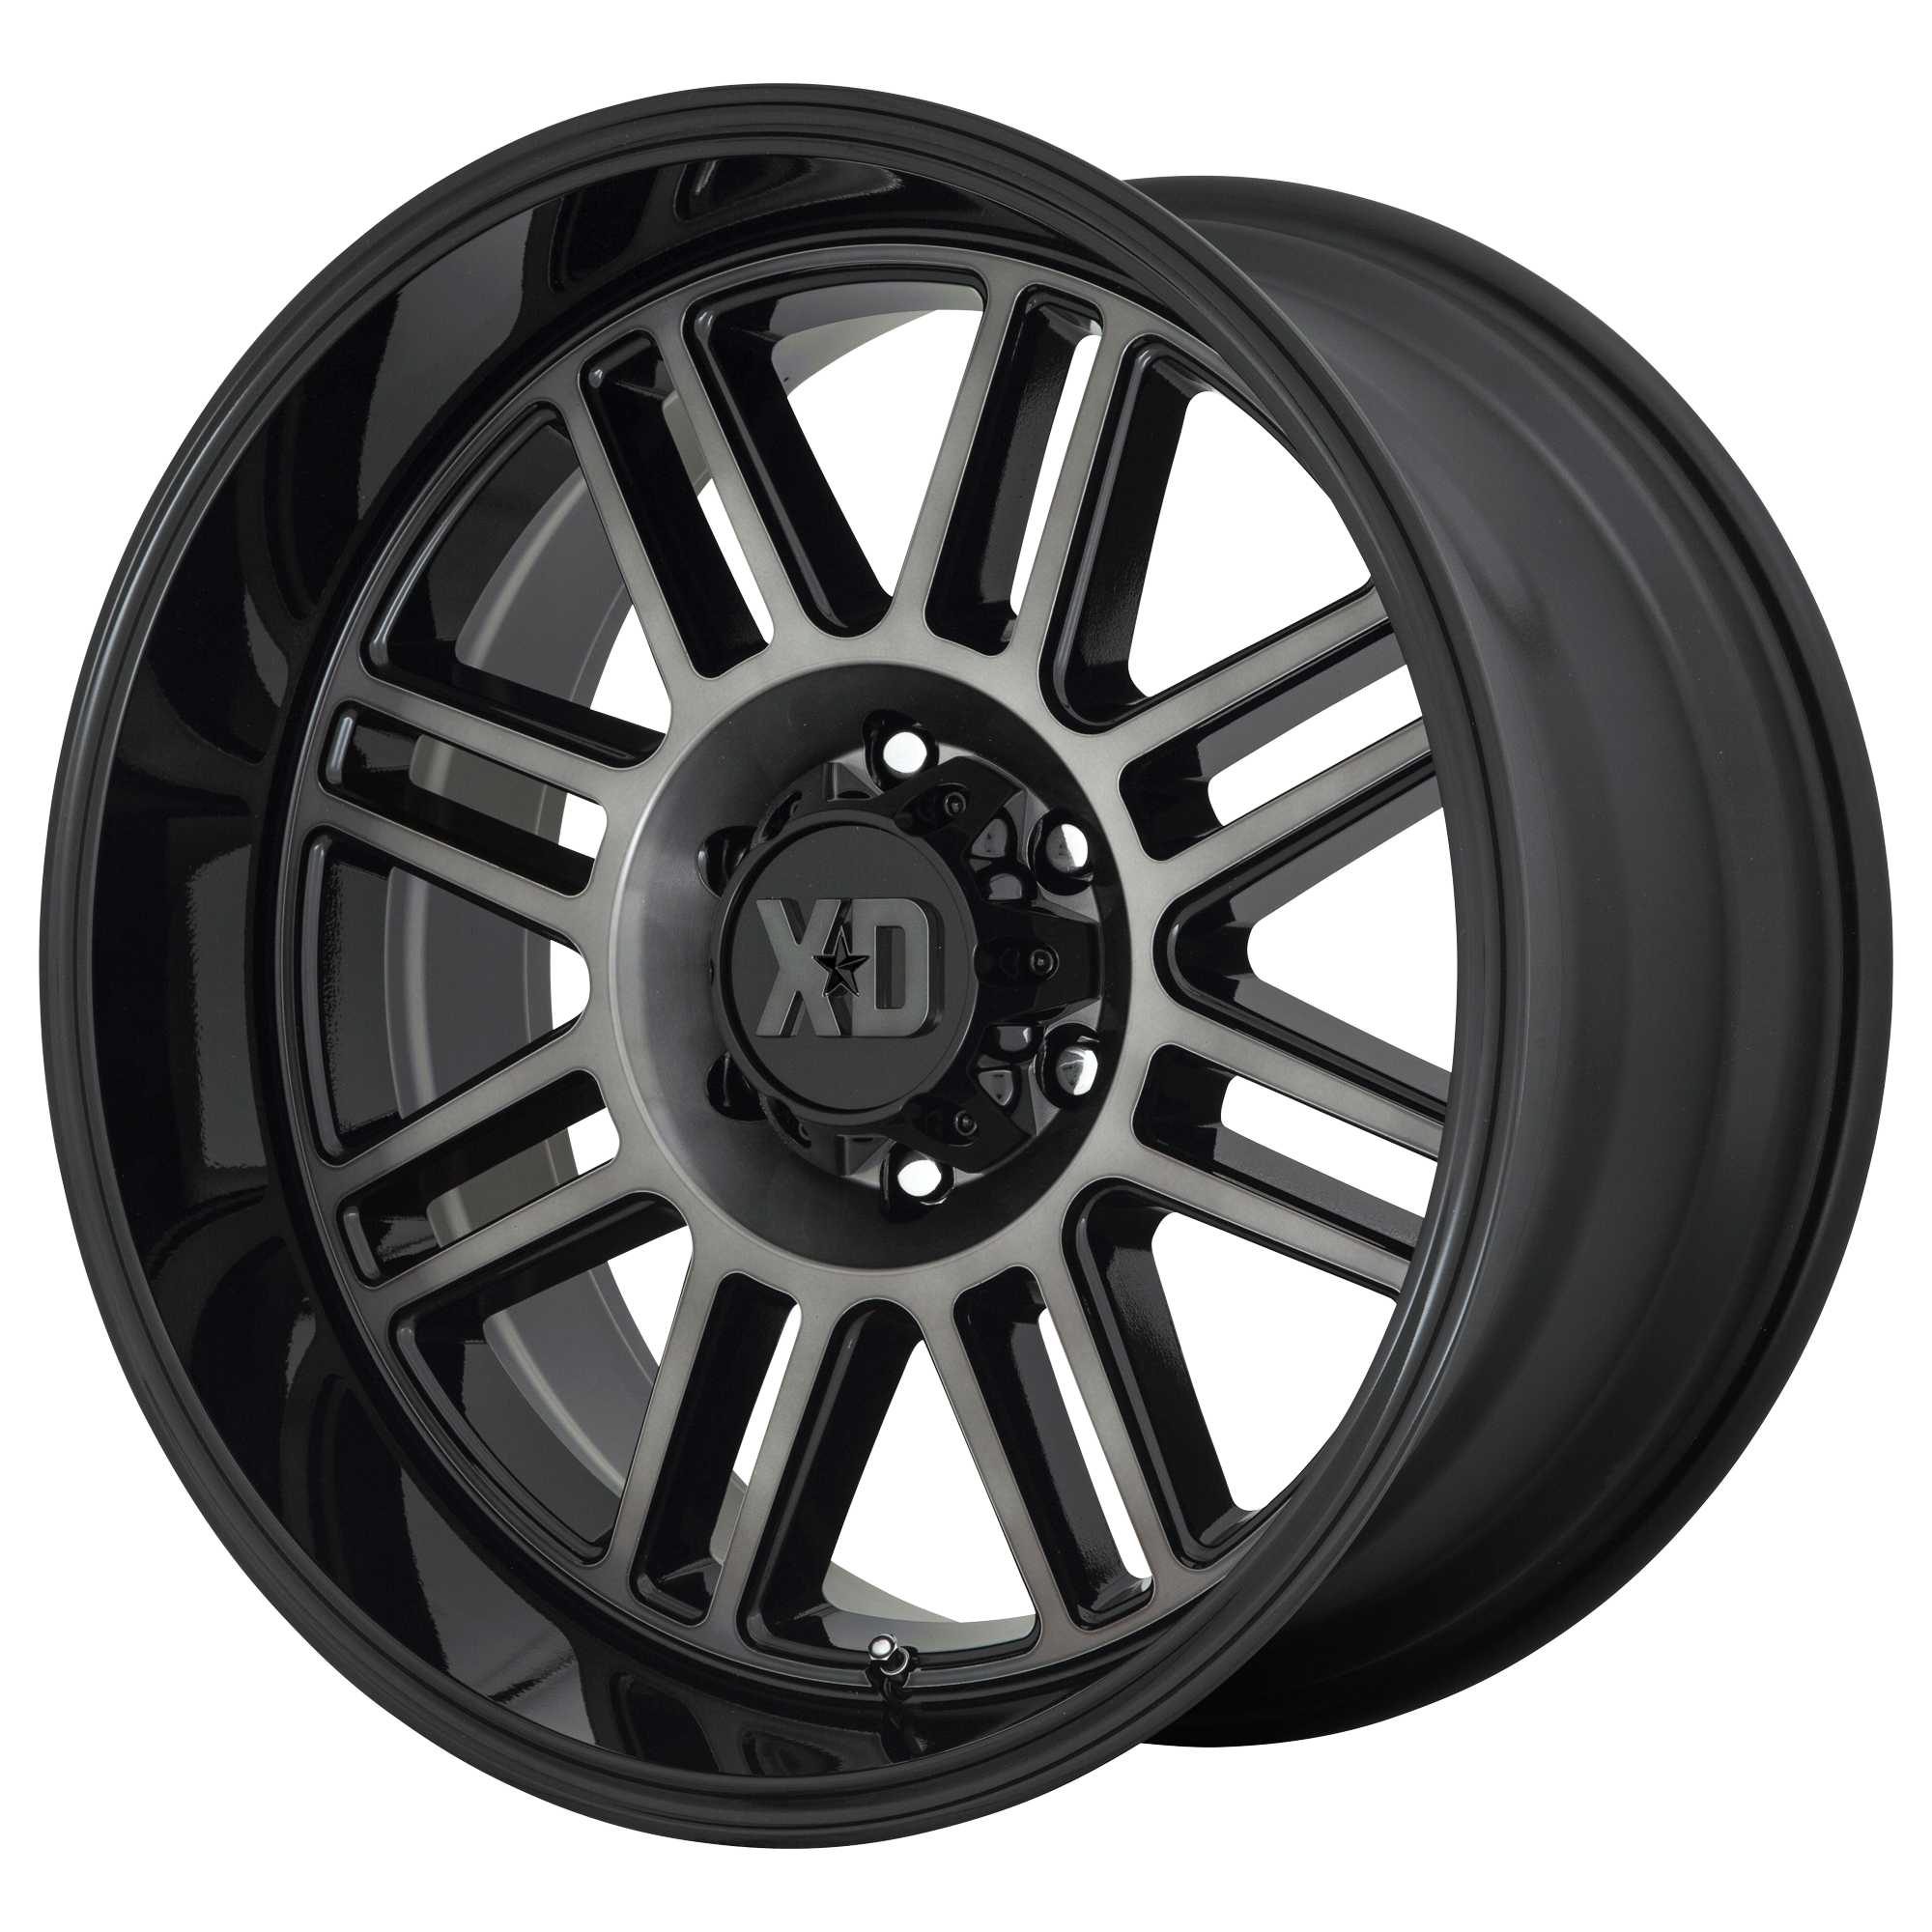 CAGE 20x10 5x127.00 GLOSS BLACK W/ GRAY TINT (-18 mm) - Tires and Engine Performance